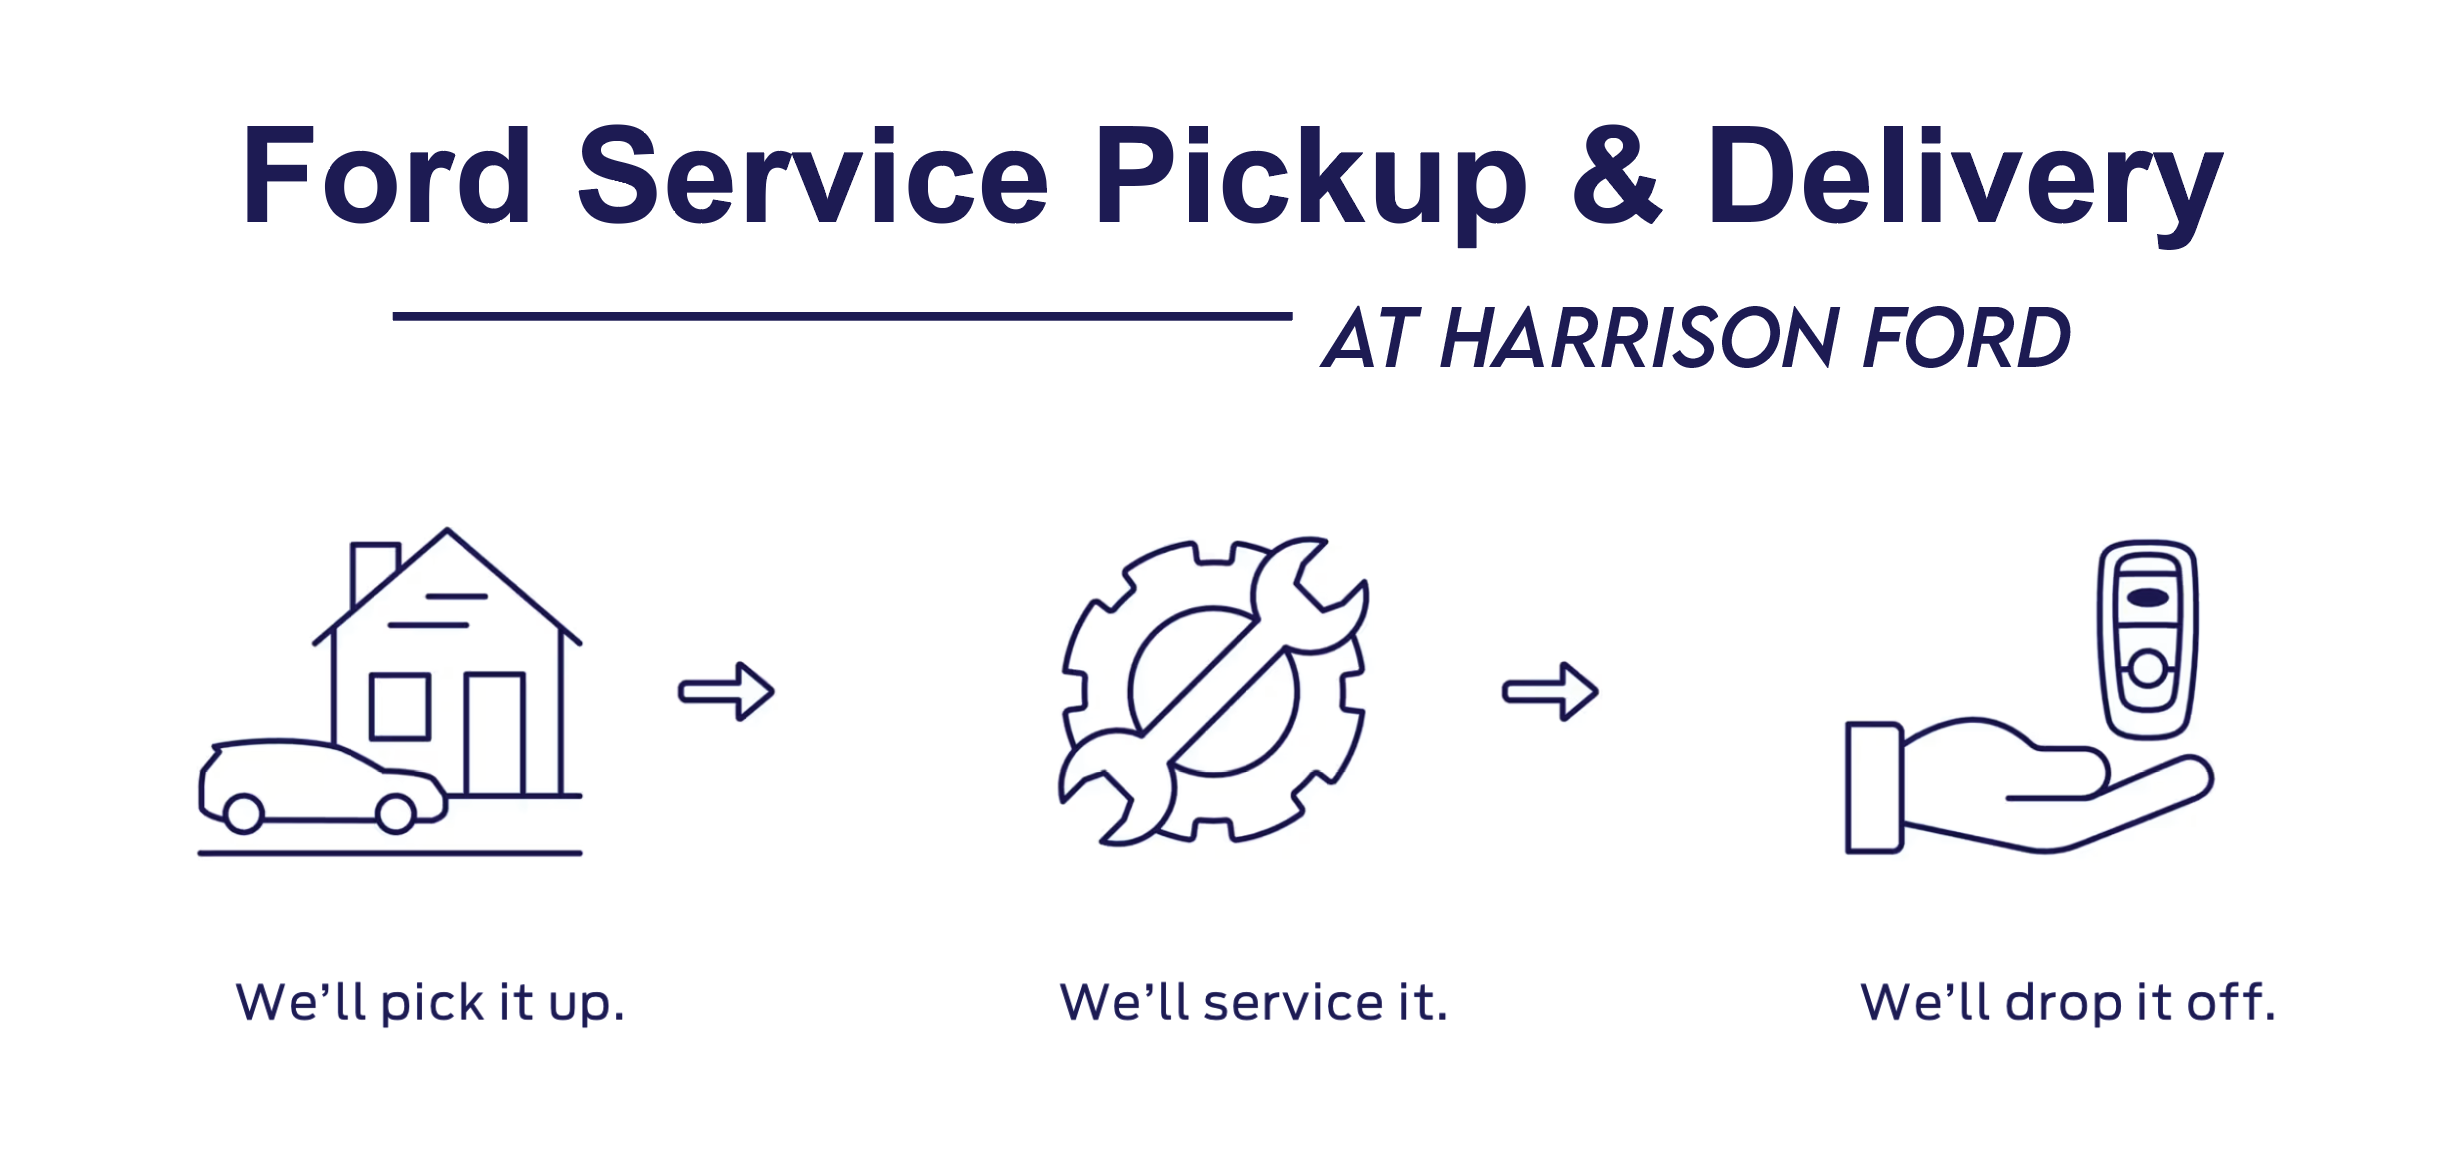 Ford Service Pickup & Delivery at Harrison Ford in Wellington OH